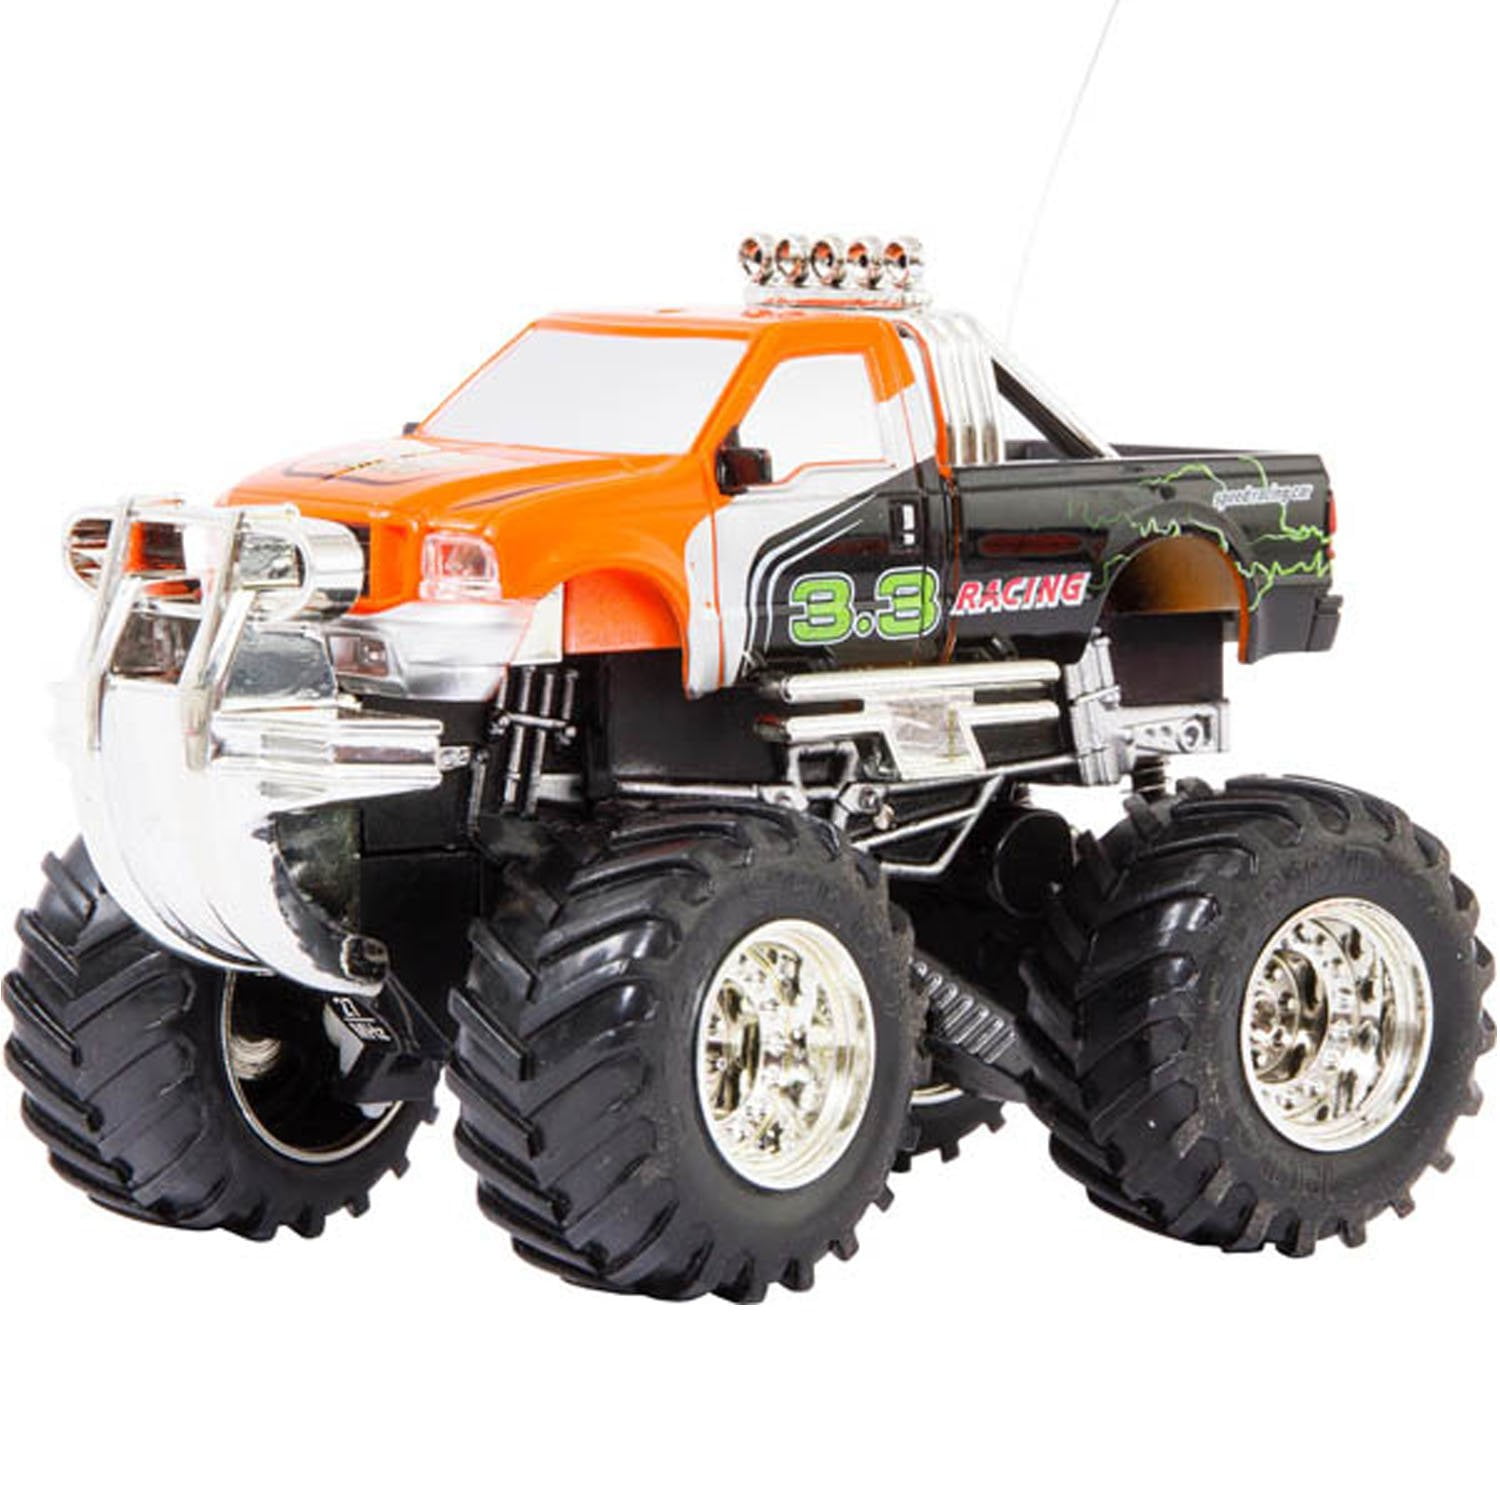 1:43 2.4G 4WD RC Car Remote Control High Speed Electric Toy Truck Christmas Gift 